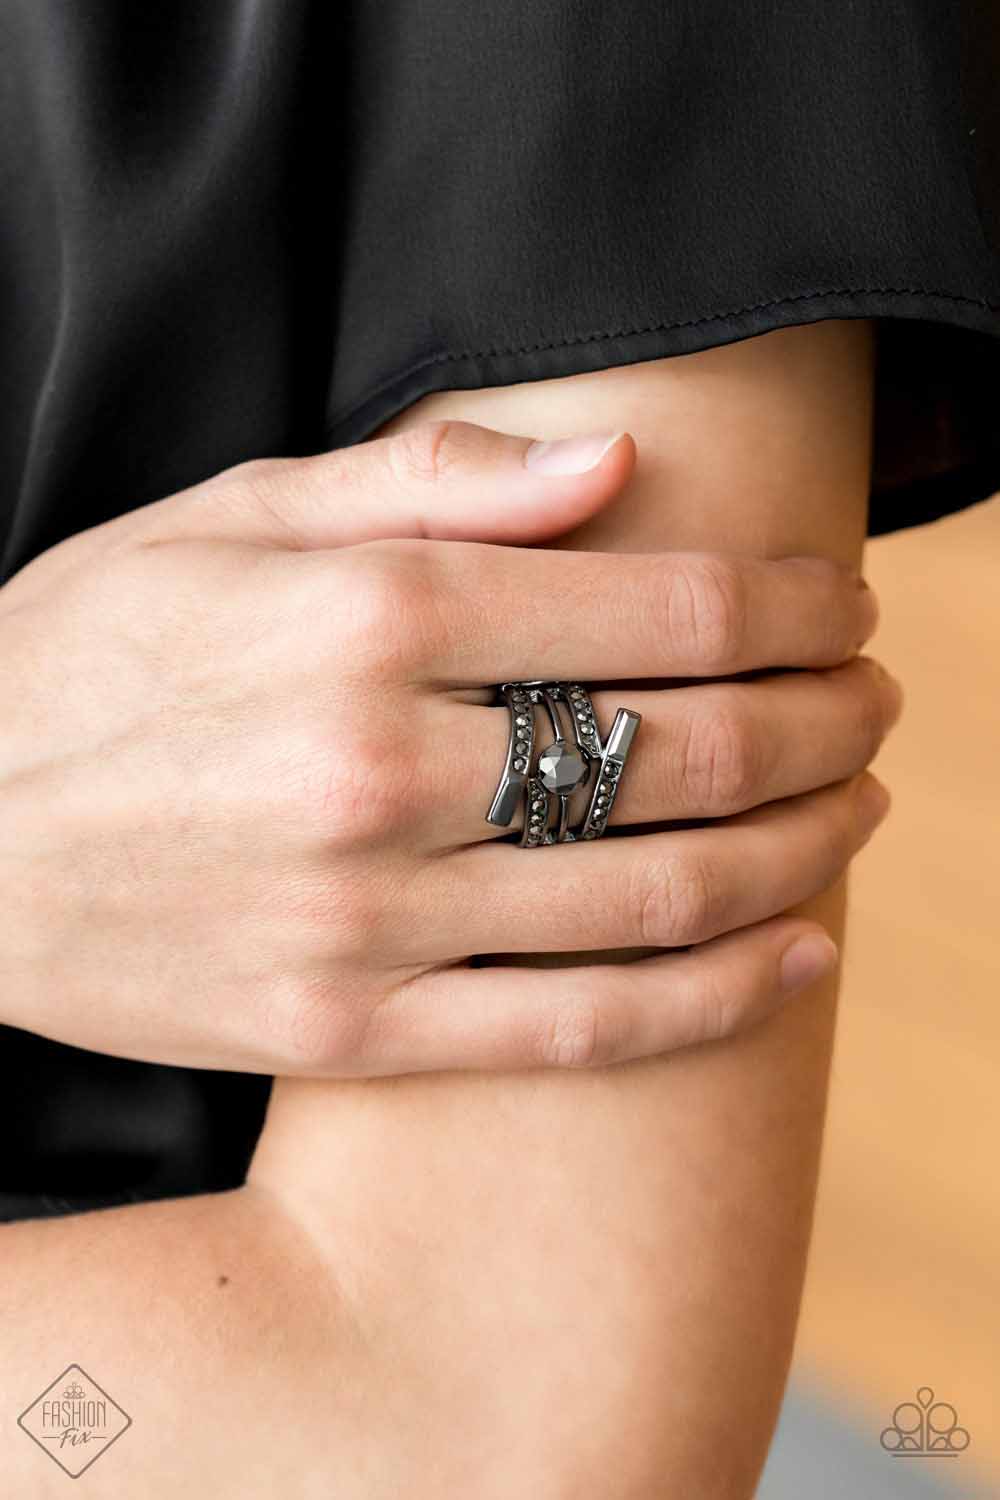 Paparazzi Well Played Black Ring - Fashion Fix Magnificent Musings July 2020